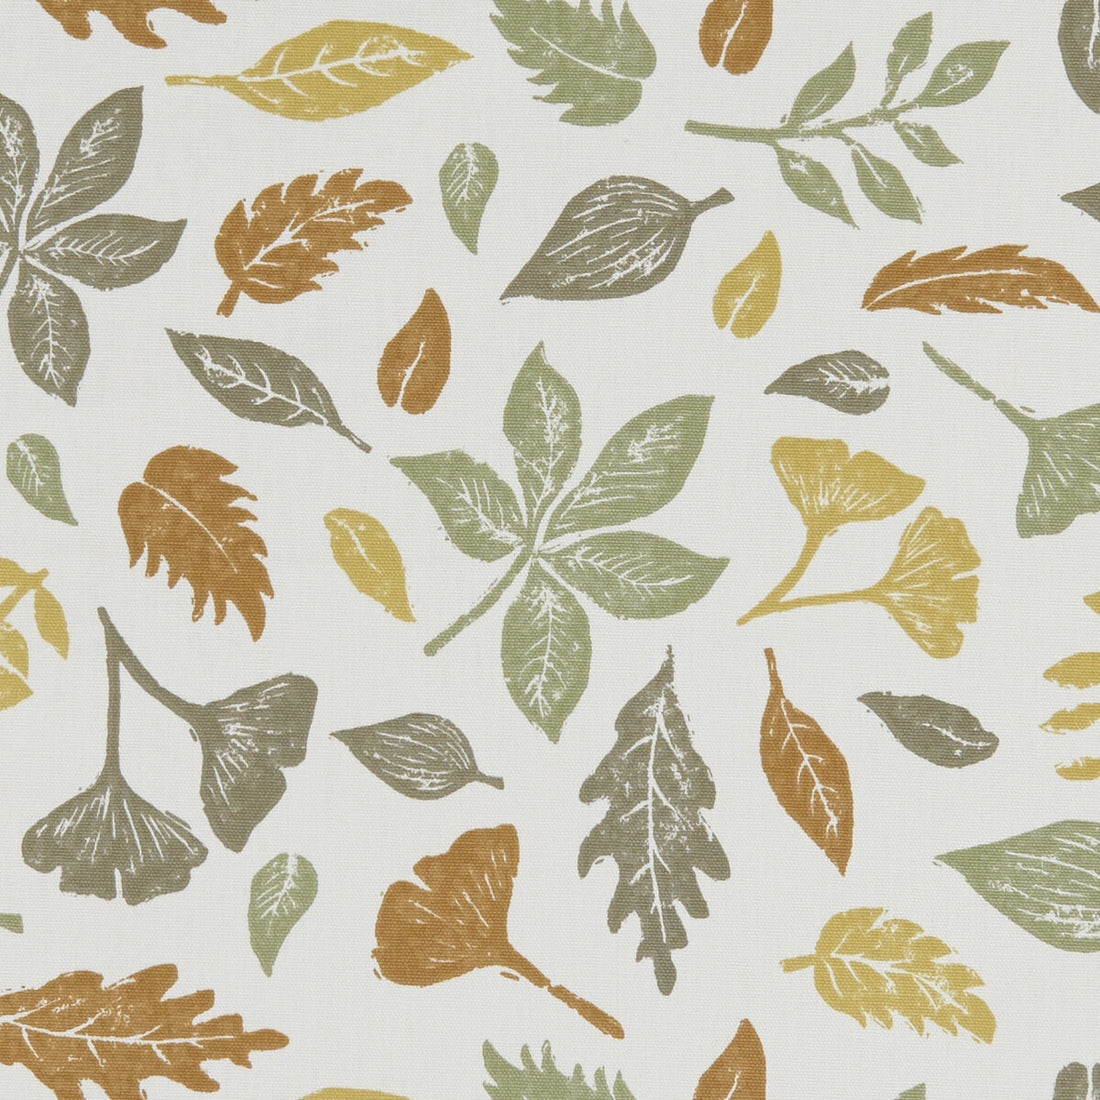 Hawthorn fabric in autumn color - pattern F1188/01.CAC.0 - by Clarke And Clarke in the Land &amp; Sea By Studio G For C&amp;C collection